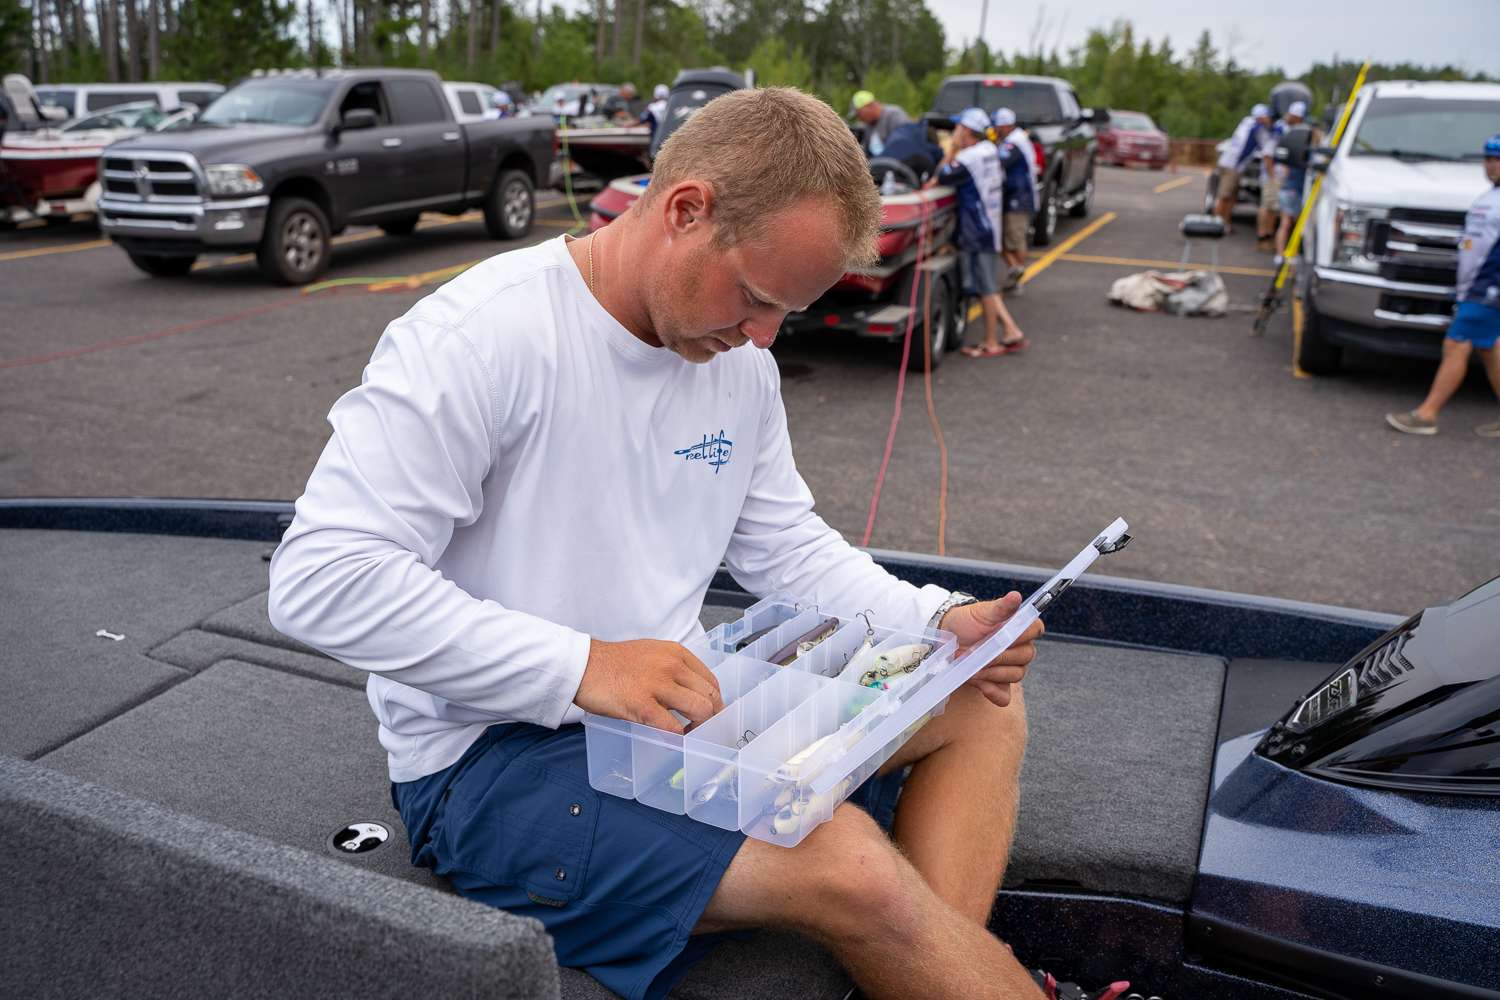 Nearby, anglers get ready for Day 1. Eddie Levin from Ohio checks his trays.